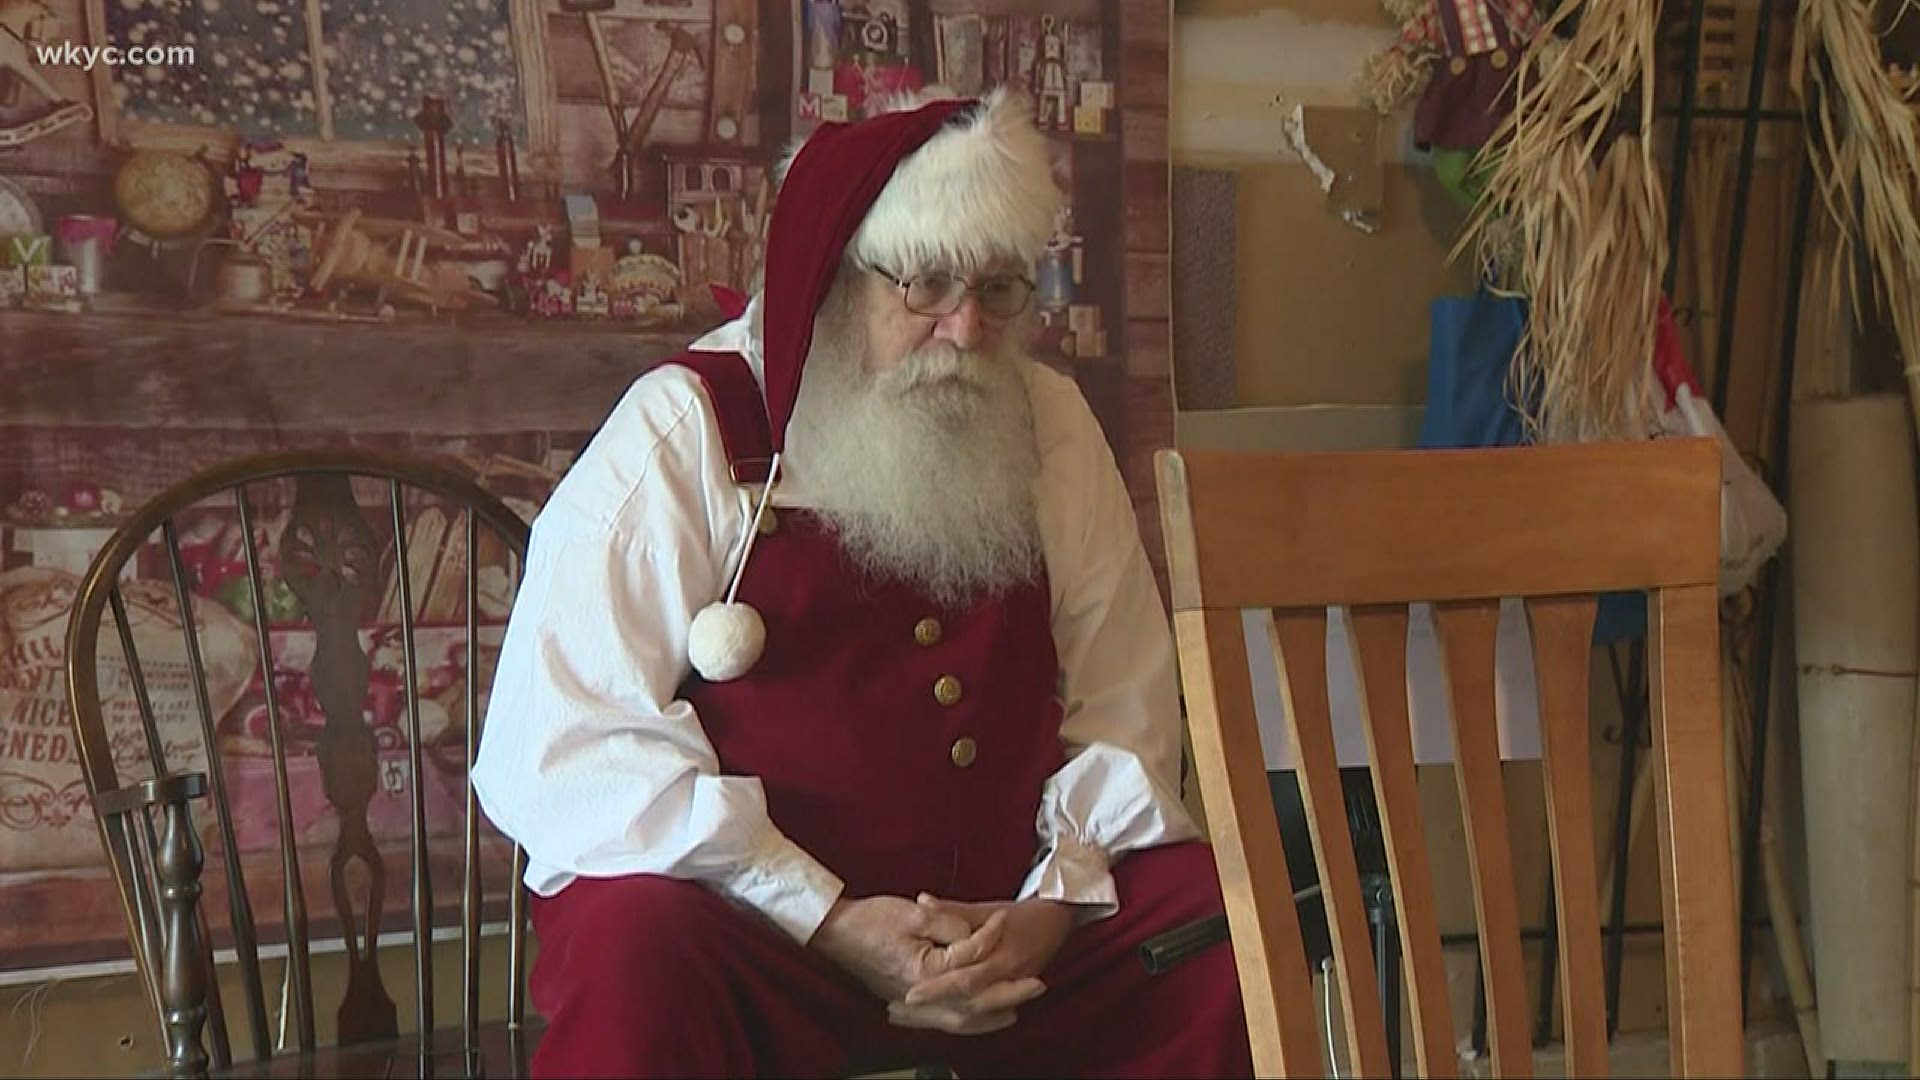 Santa is working to help spread cheer and lift spirits during this time of uncertainty -- even if Christmas is still months away.